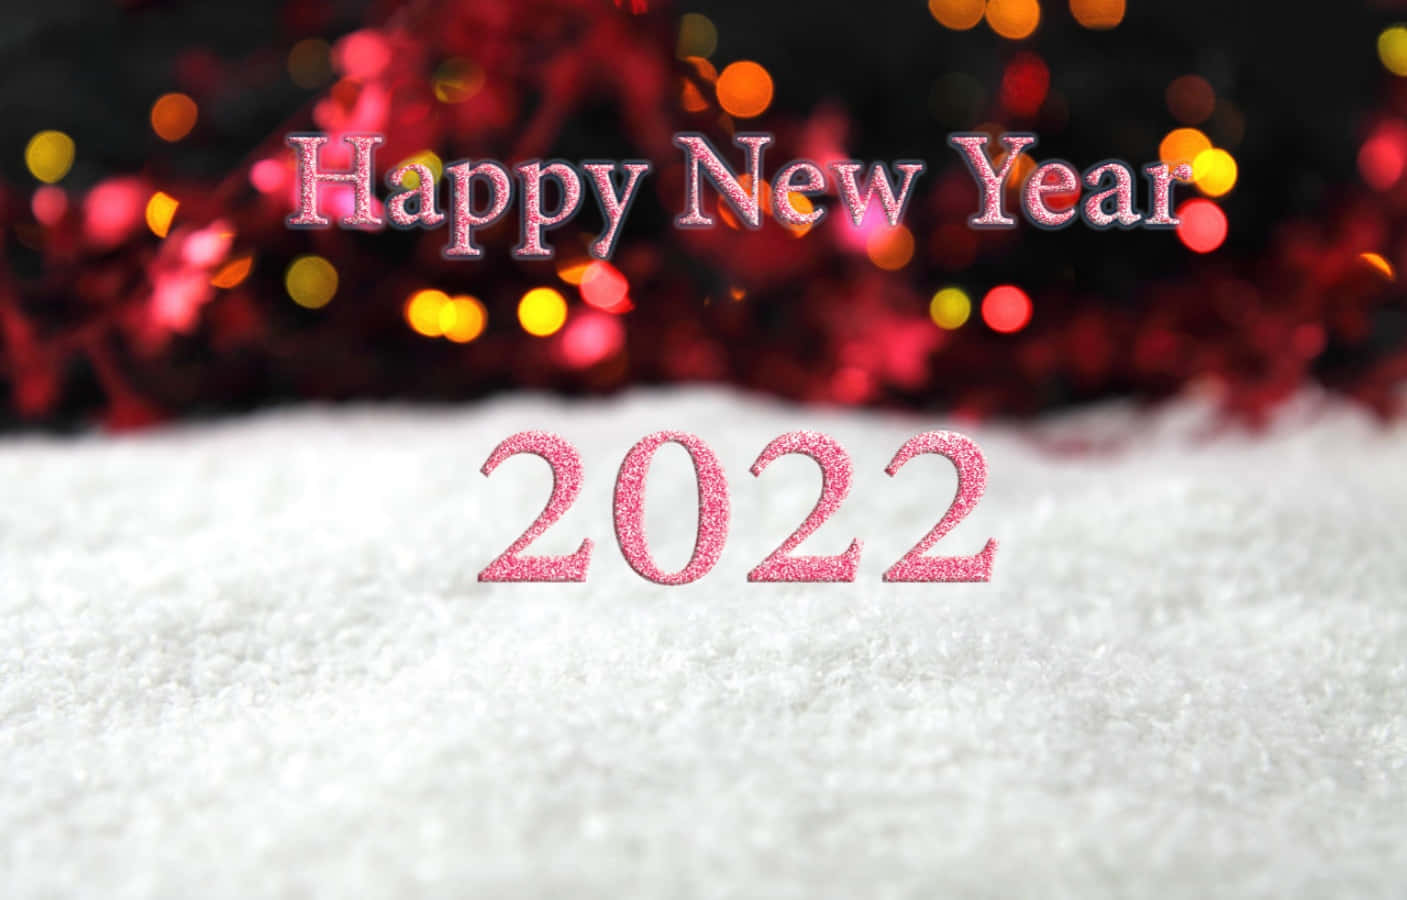 Wishing you a Happy New Year, 2022!